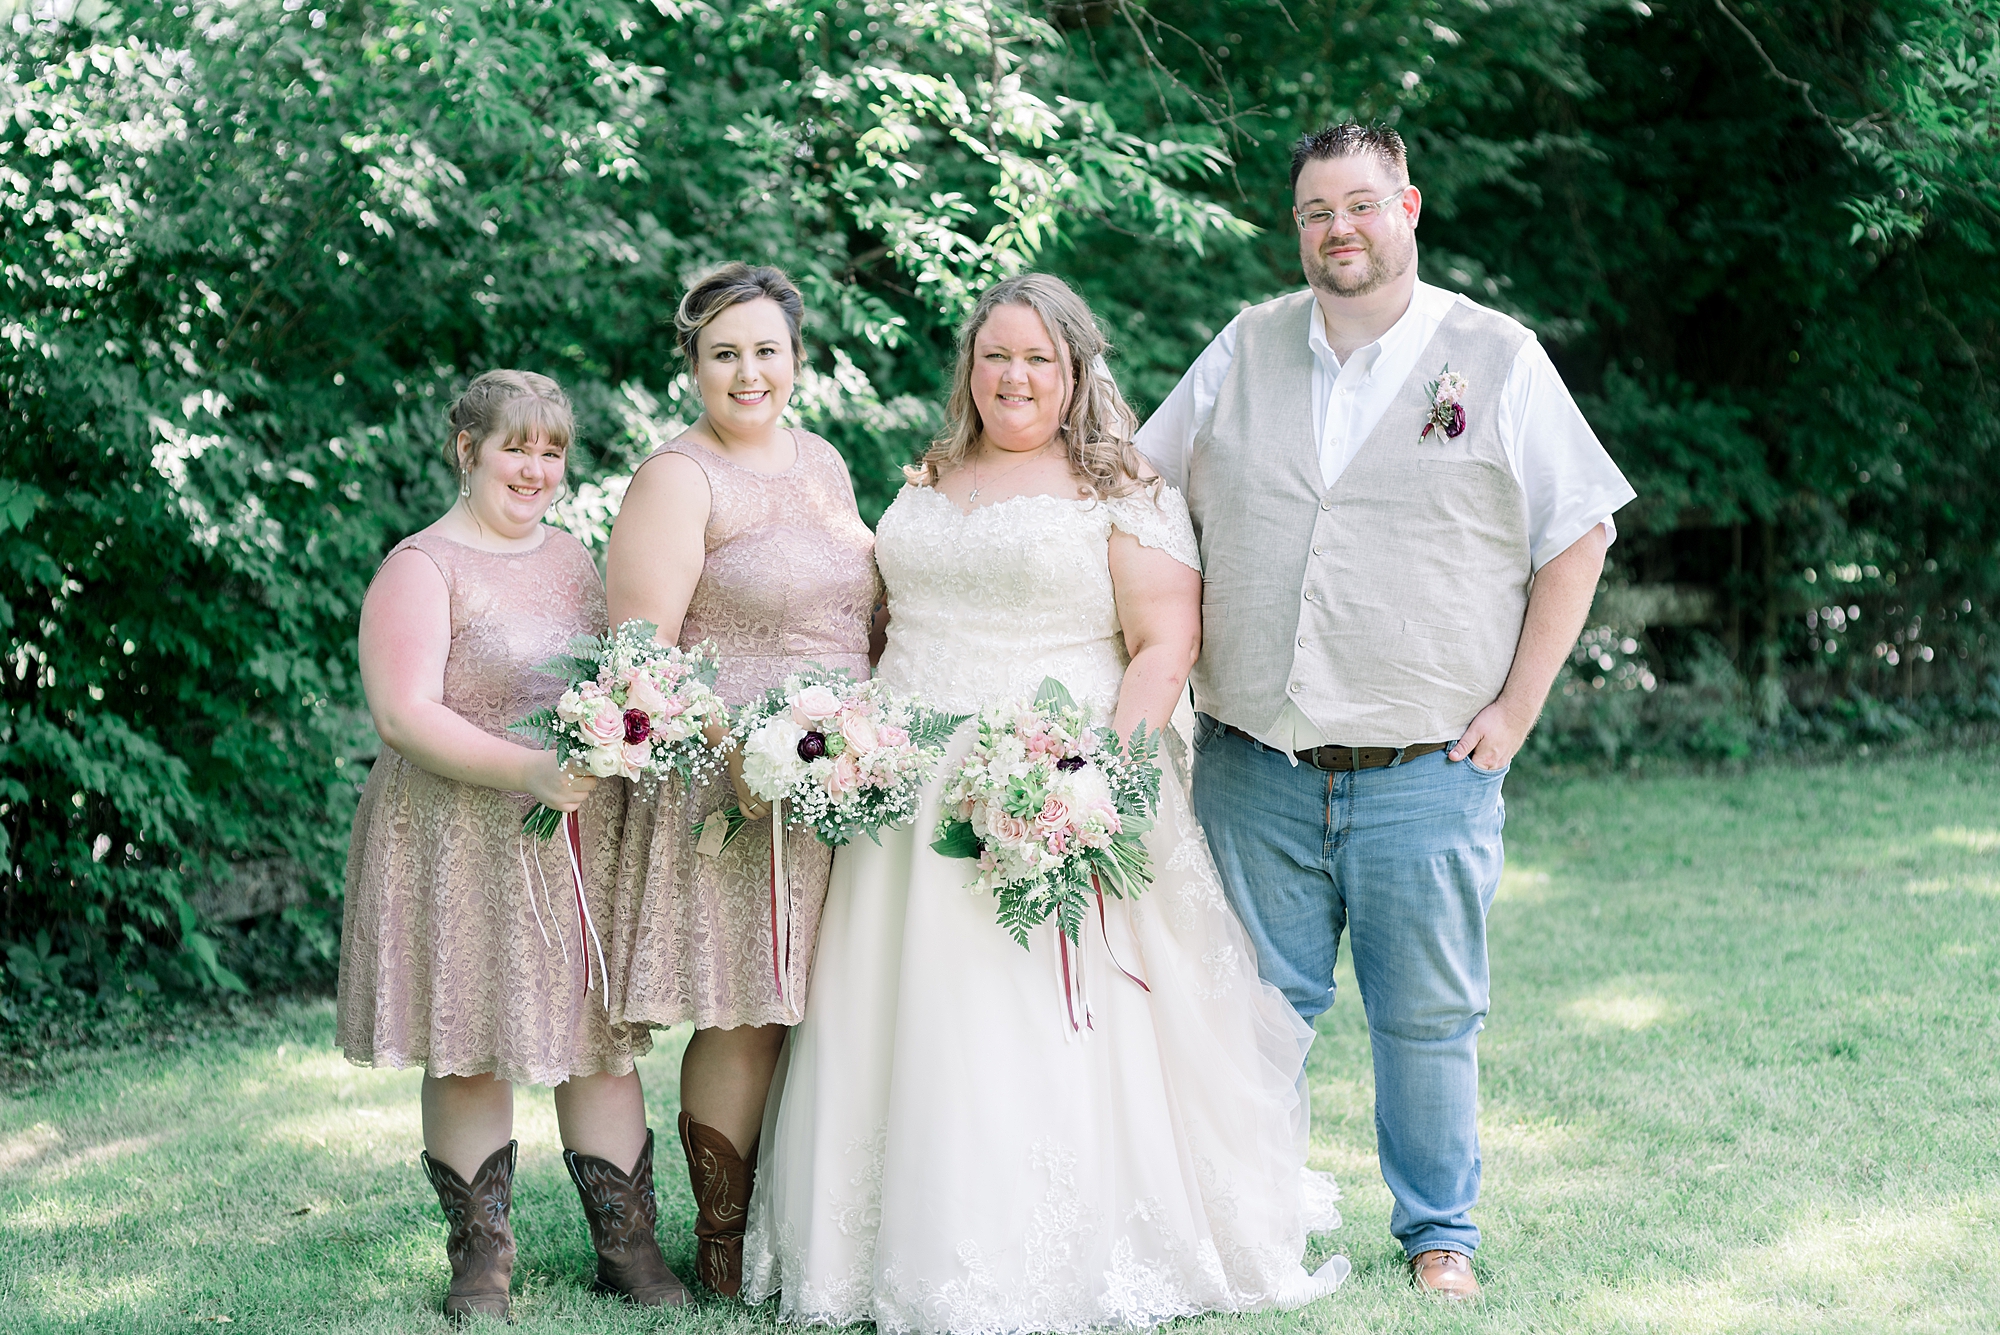 Bridal Party Portraits at a Garden Wedding in Nashville Tennessee by Dolly DeLong Photography